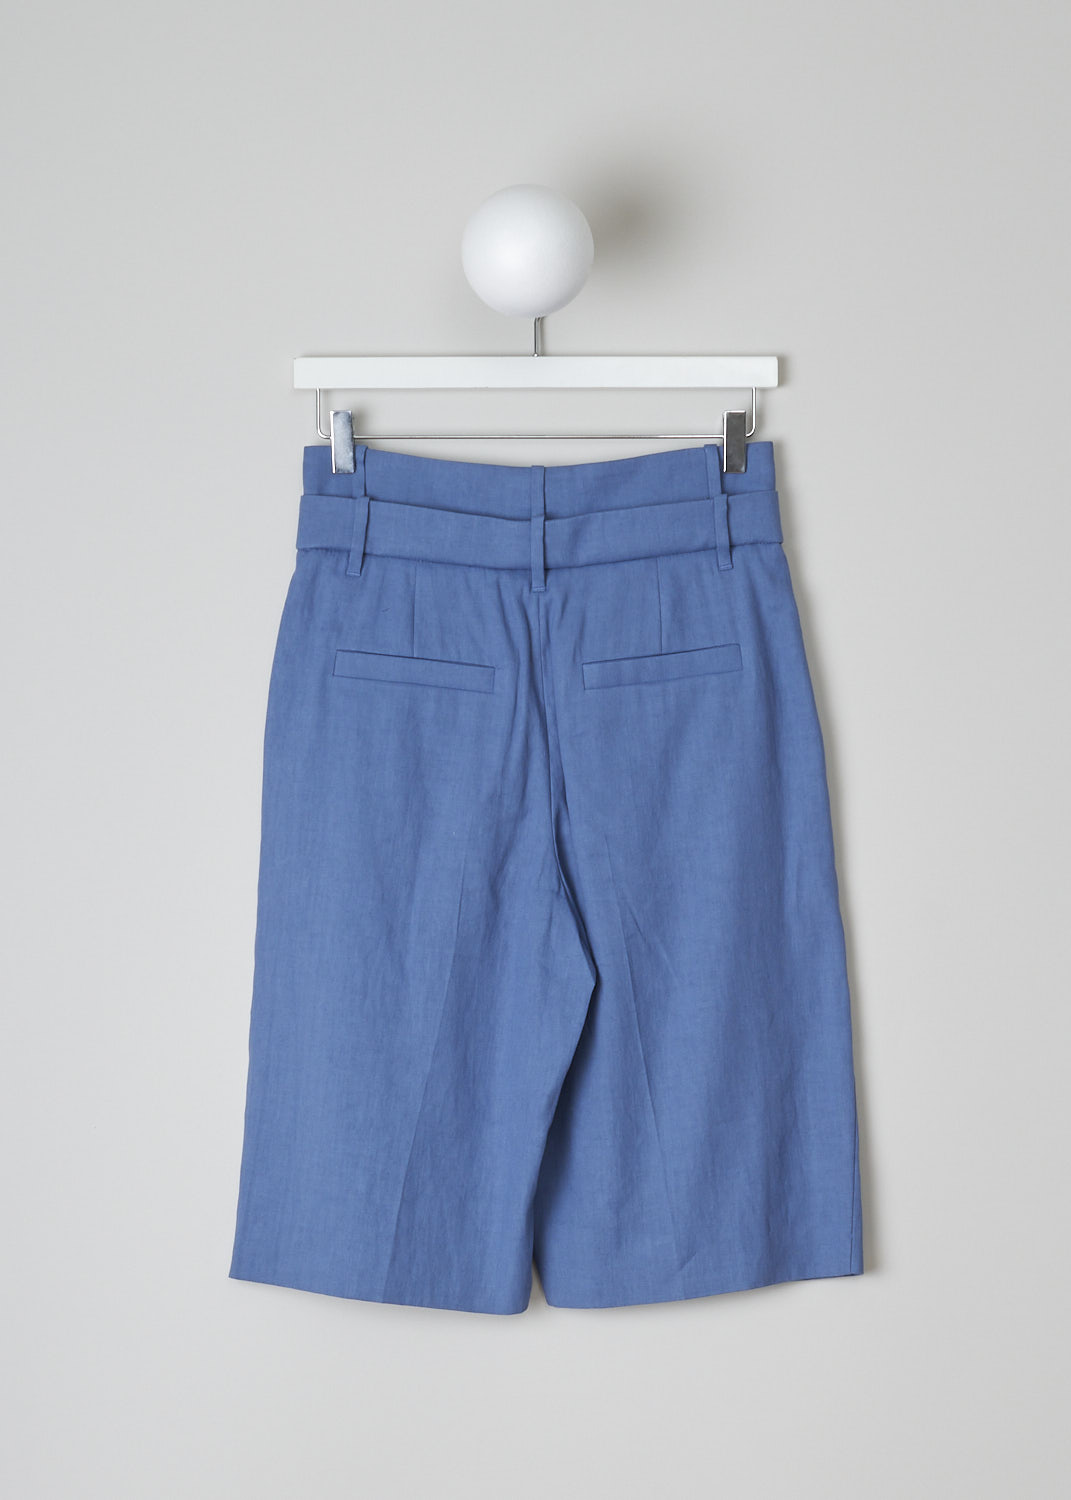 BRUNELLO CUCINELLI, BLUE LINEN BERMUNDA PANTS, MF591P7593_C8593, Blue, Back, These blue linen bermuda pants have a double-layered waistband, both with belt loops. These pants have a concealed claps and zip closure. The pants are pleated in the front. The pants have slanted pockets in the front and welt pockets in the back.  
